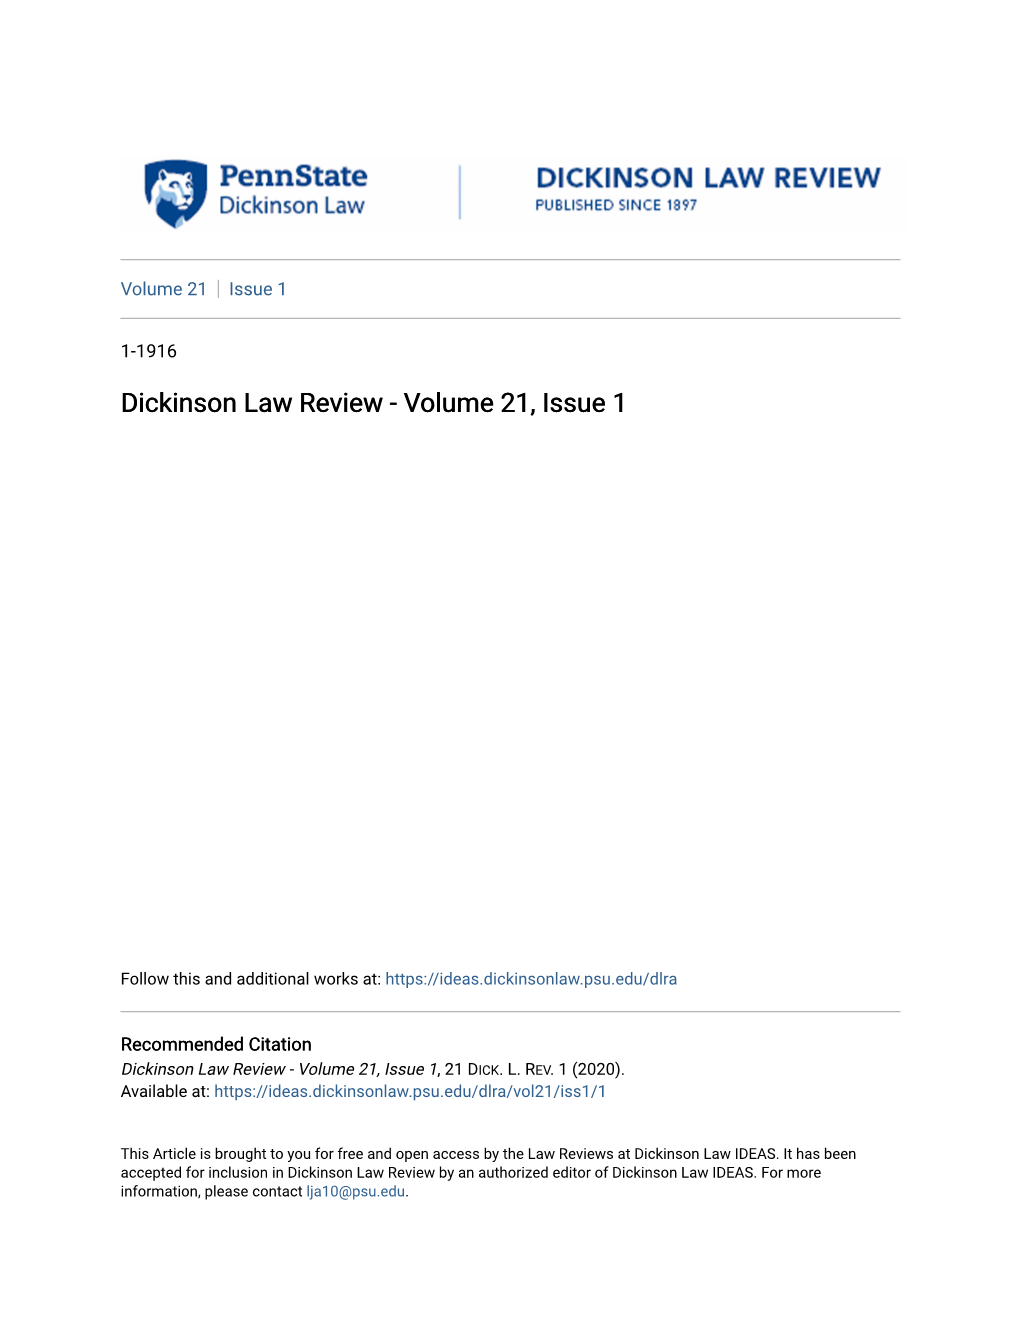 Dickinson Law Review - Volume 21, Issue 1